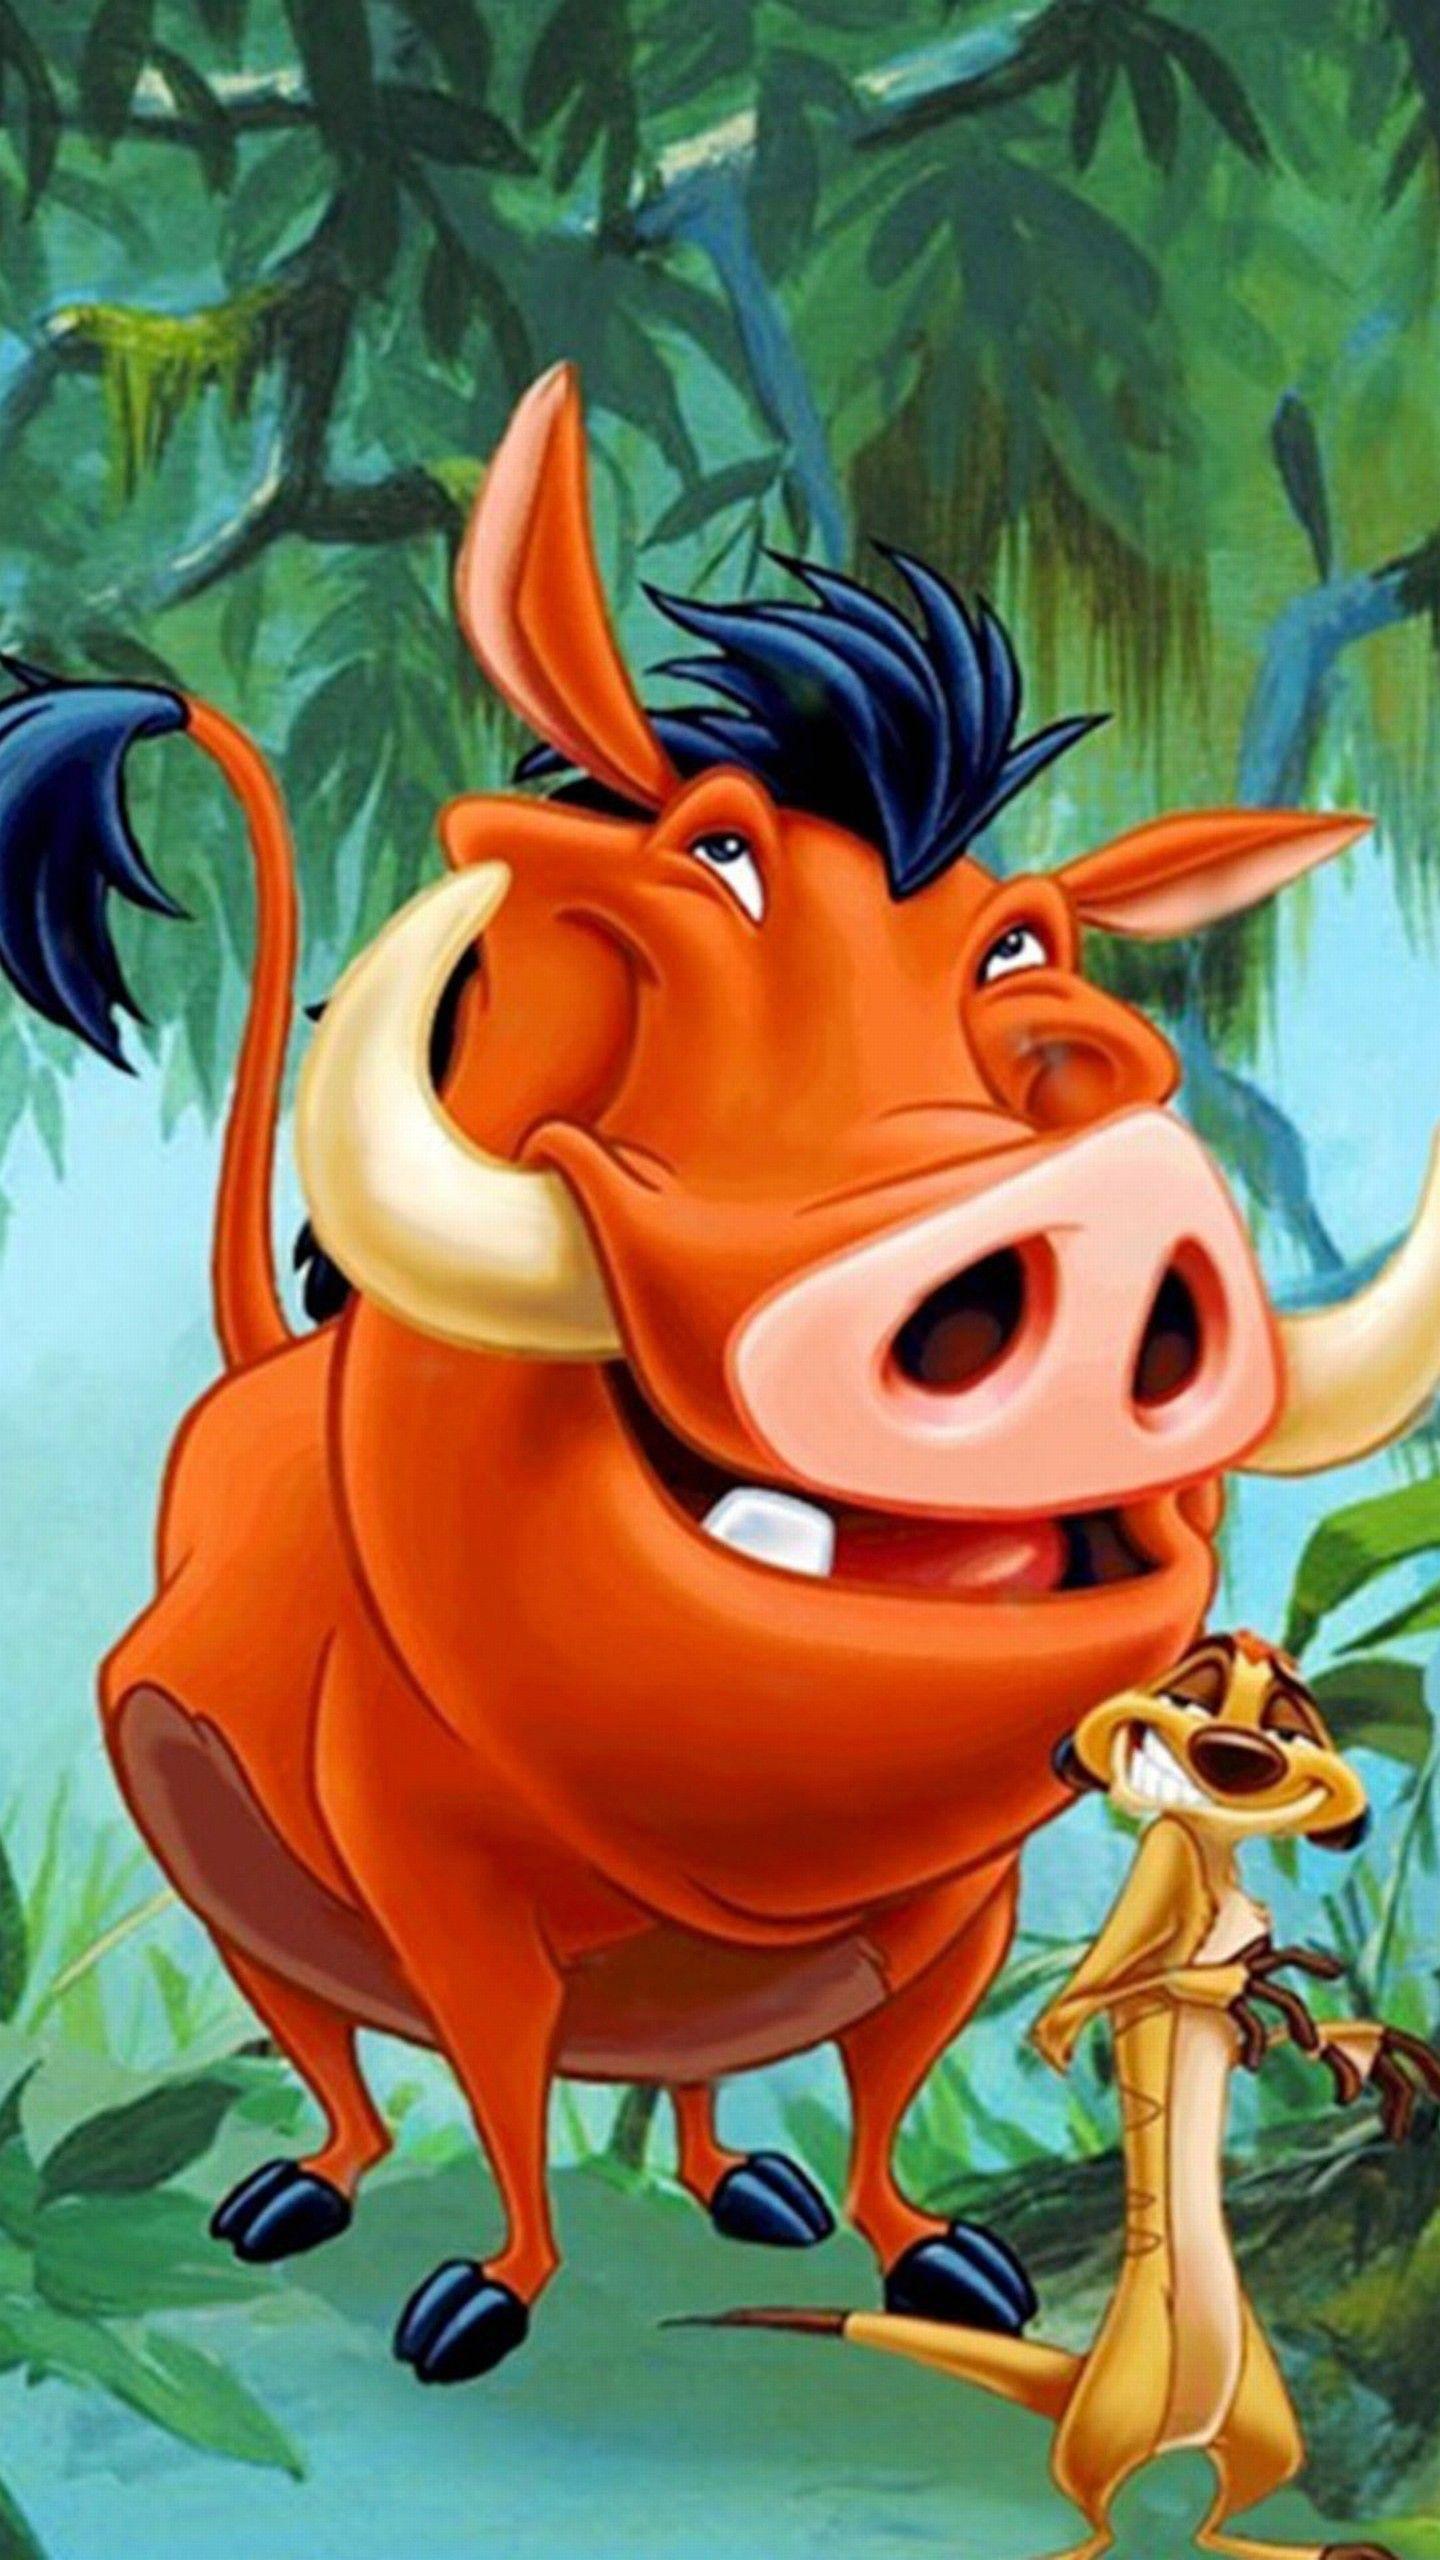 Timon And Pumbaa Wallpapers - Wallpaper Cave